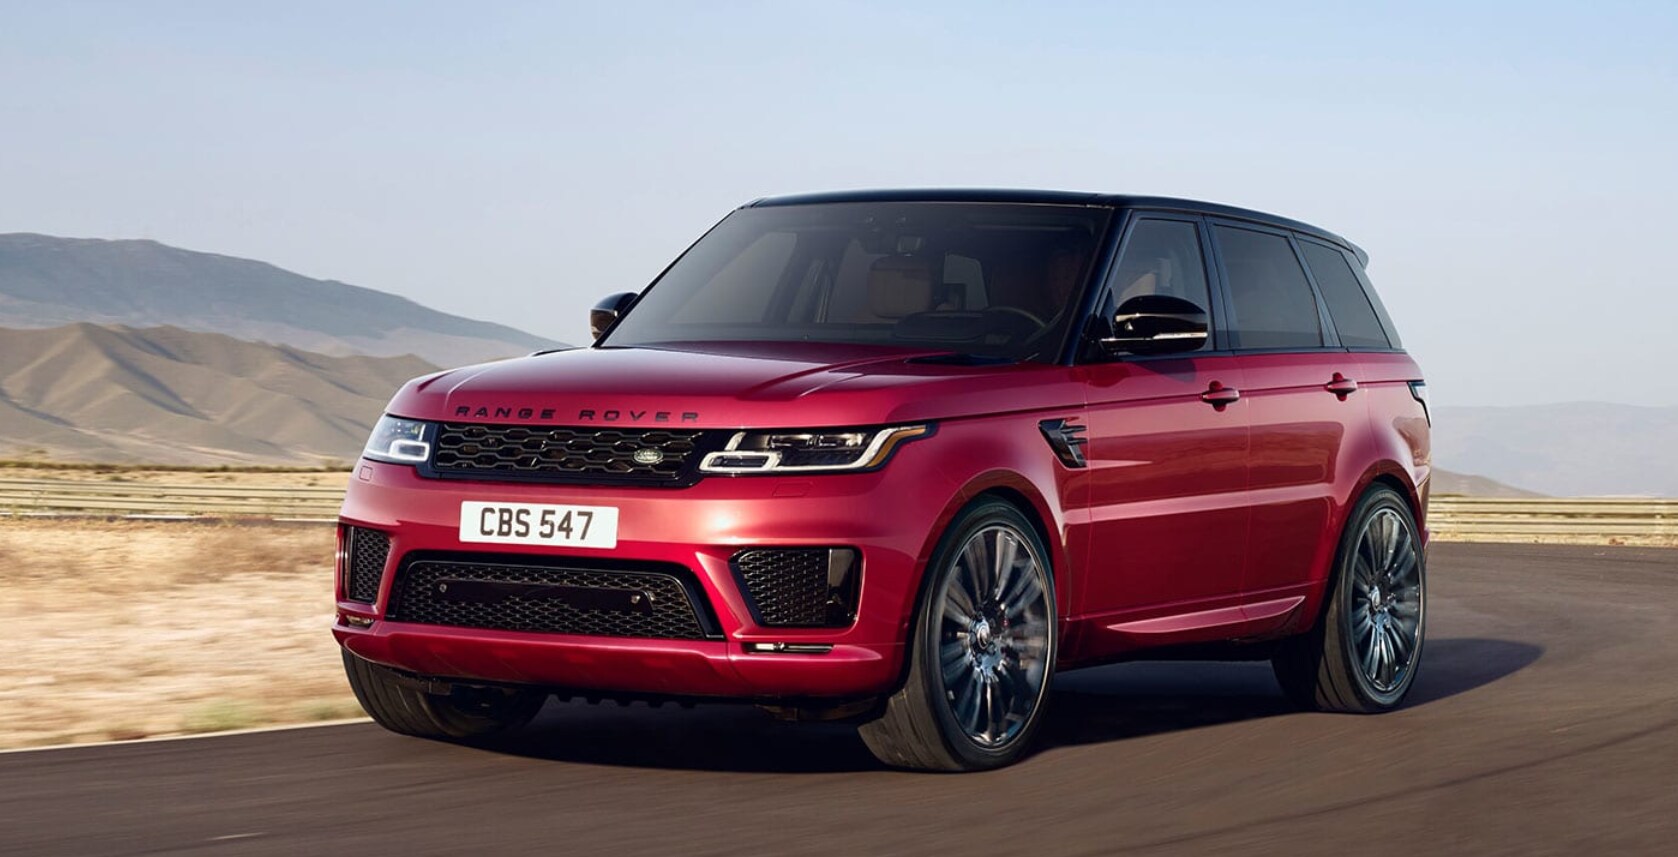 Compare Luxury SUV 2019 Land Rover Sport Land Rover Dealer